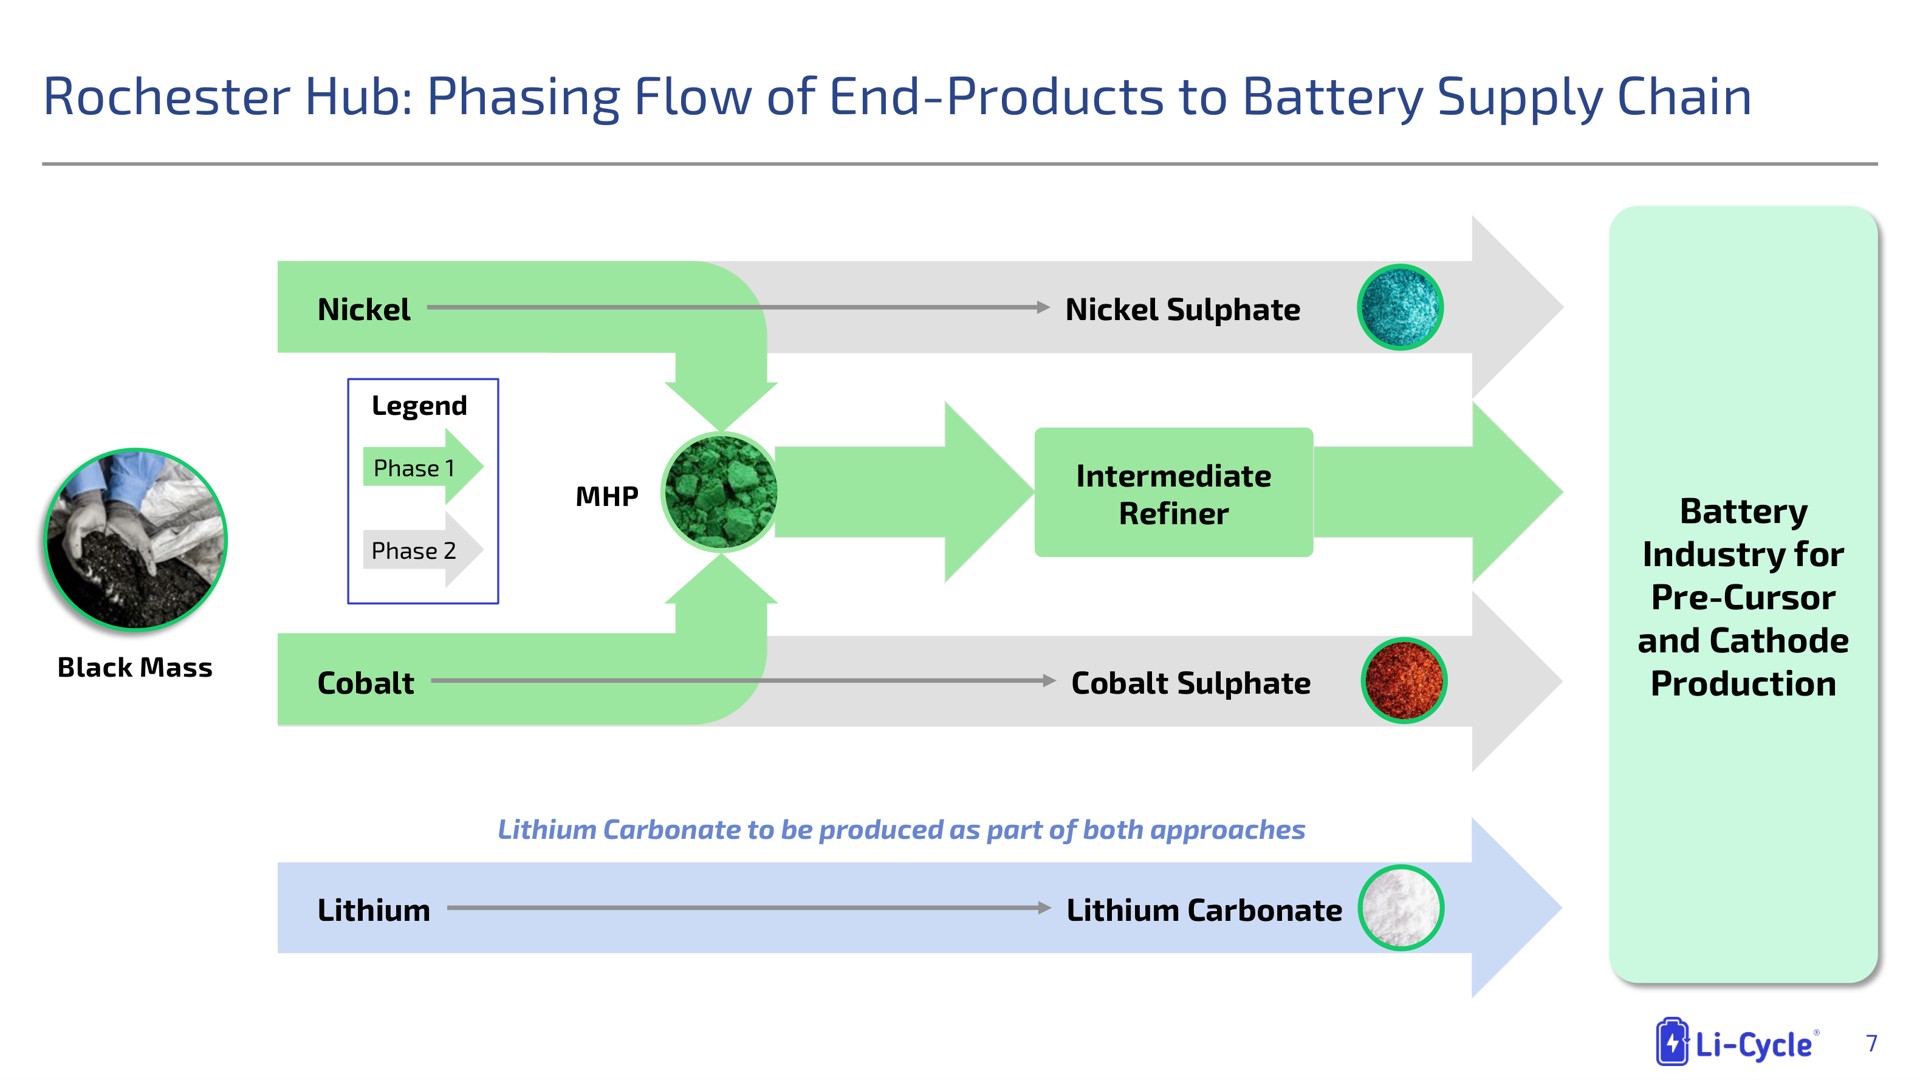 hub phasing flow of end products to battery supply chain | Li-Cycle